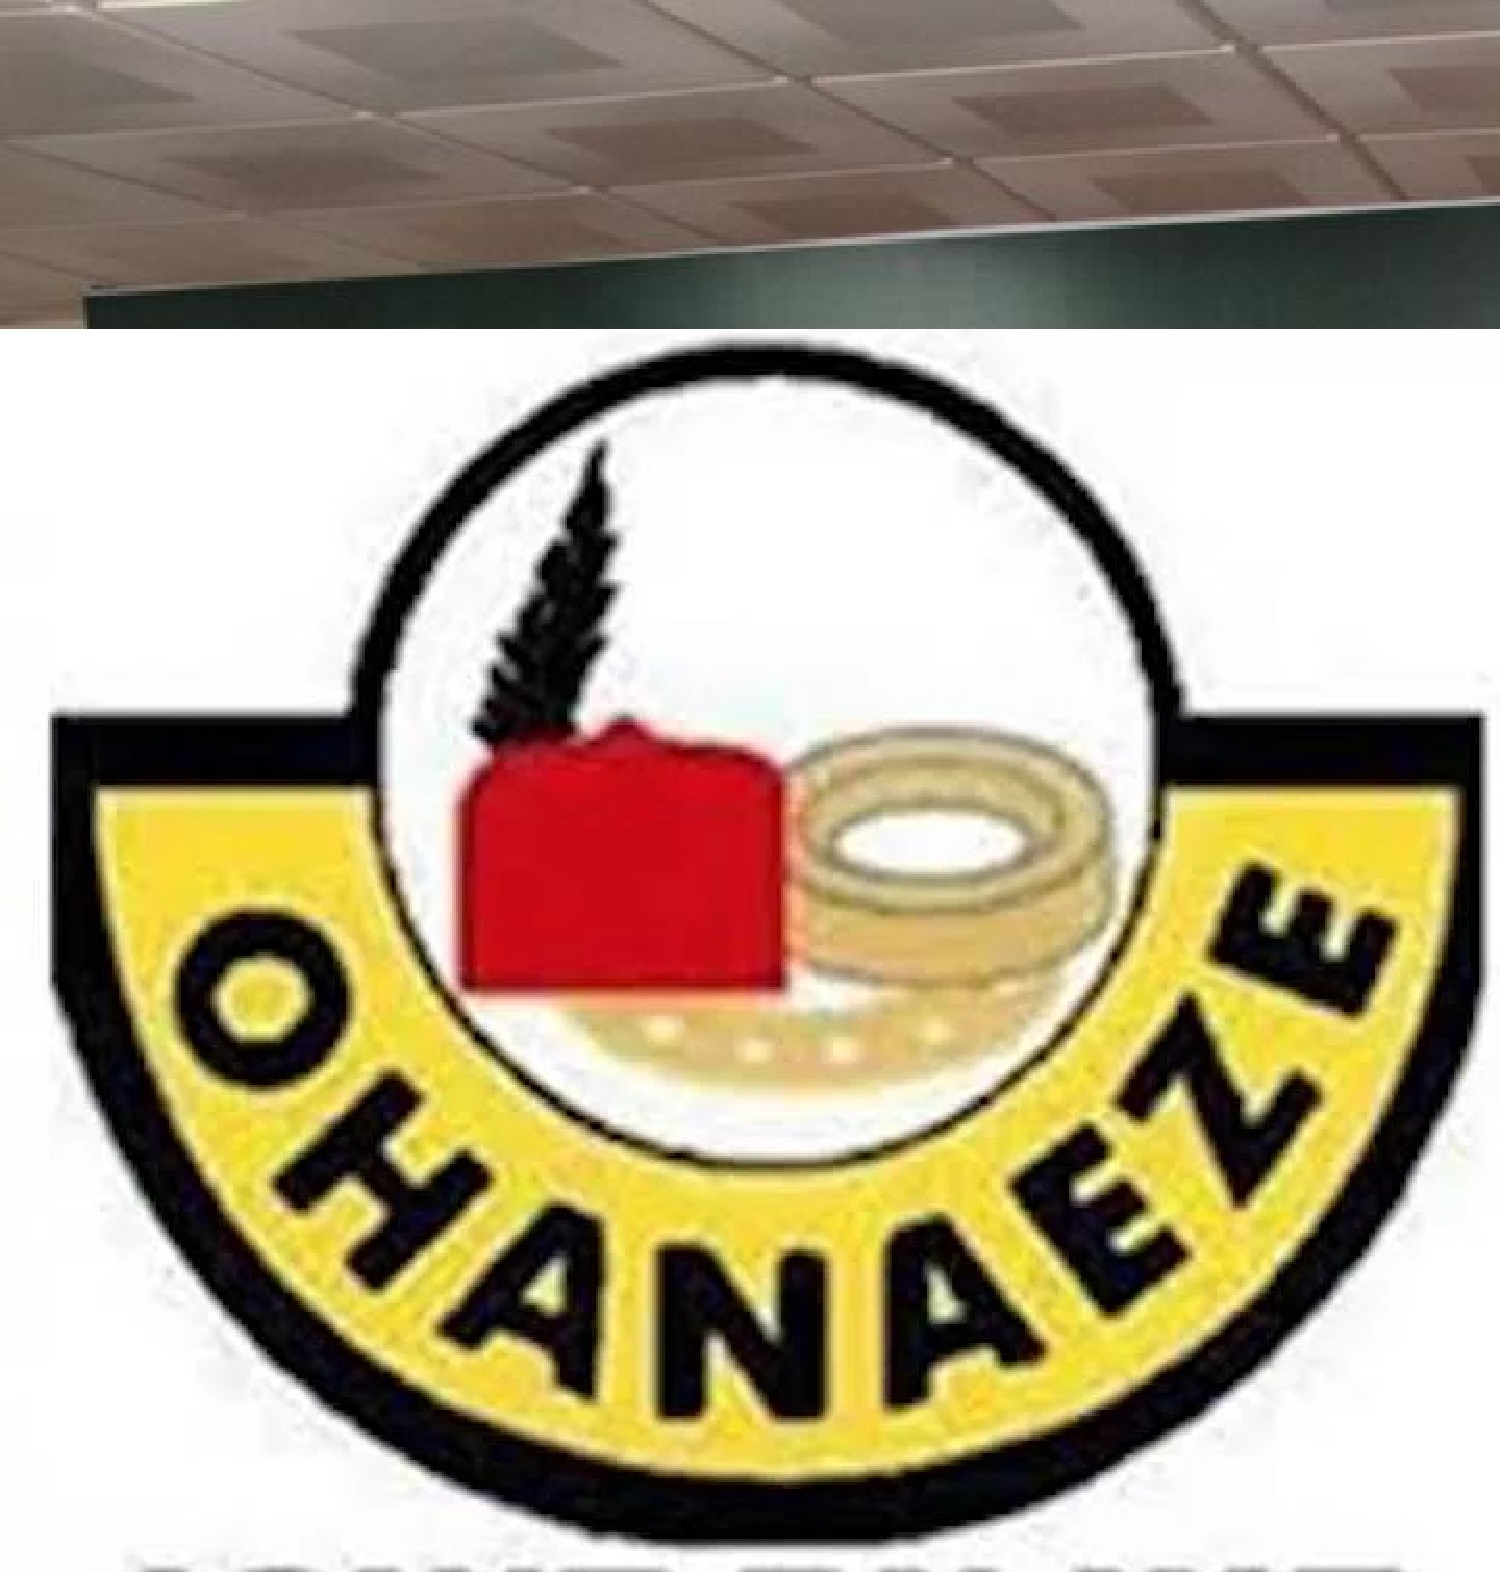 Implement Gowon's 3Rs before 2022 or risk Nigeria's unity, Ohanaeze youths tell Buhari